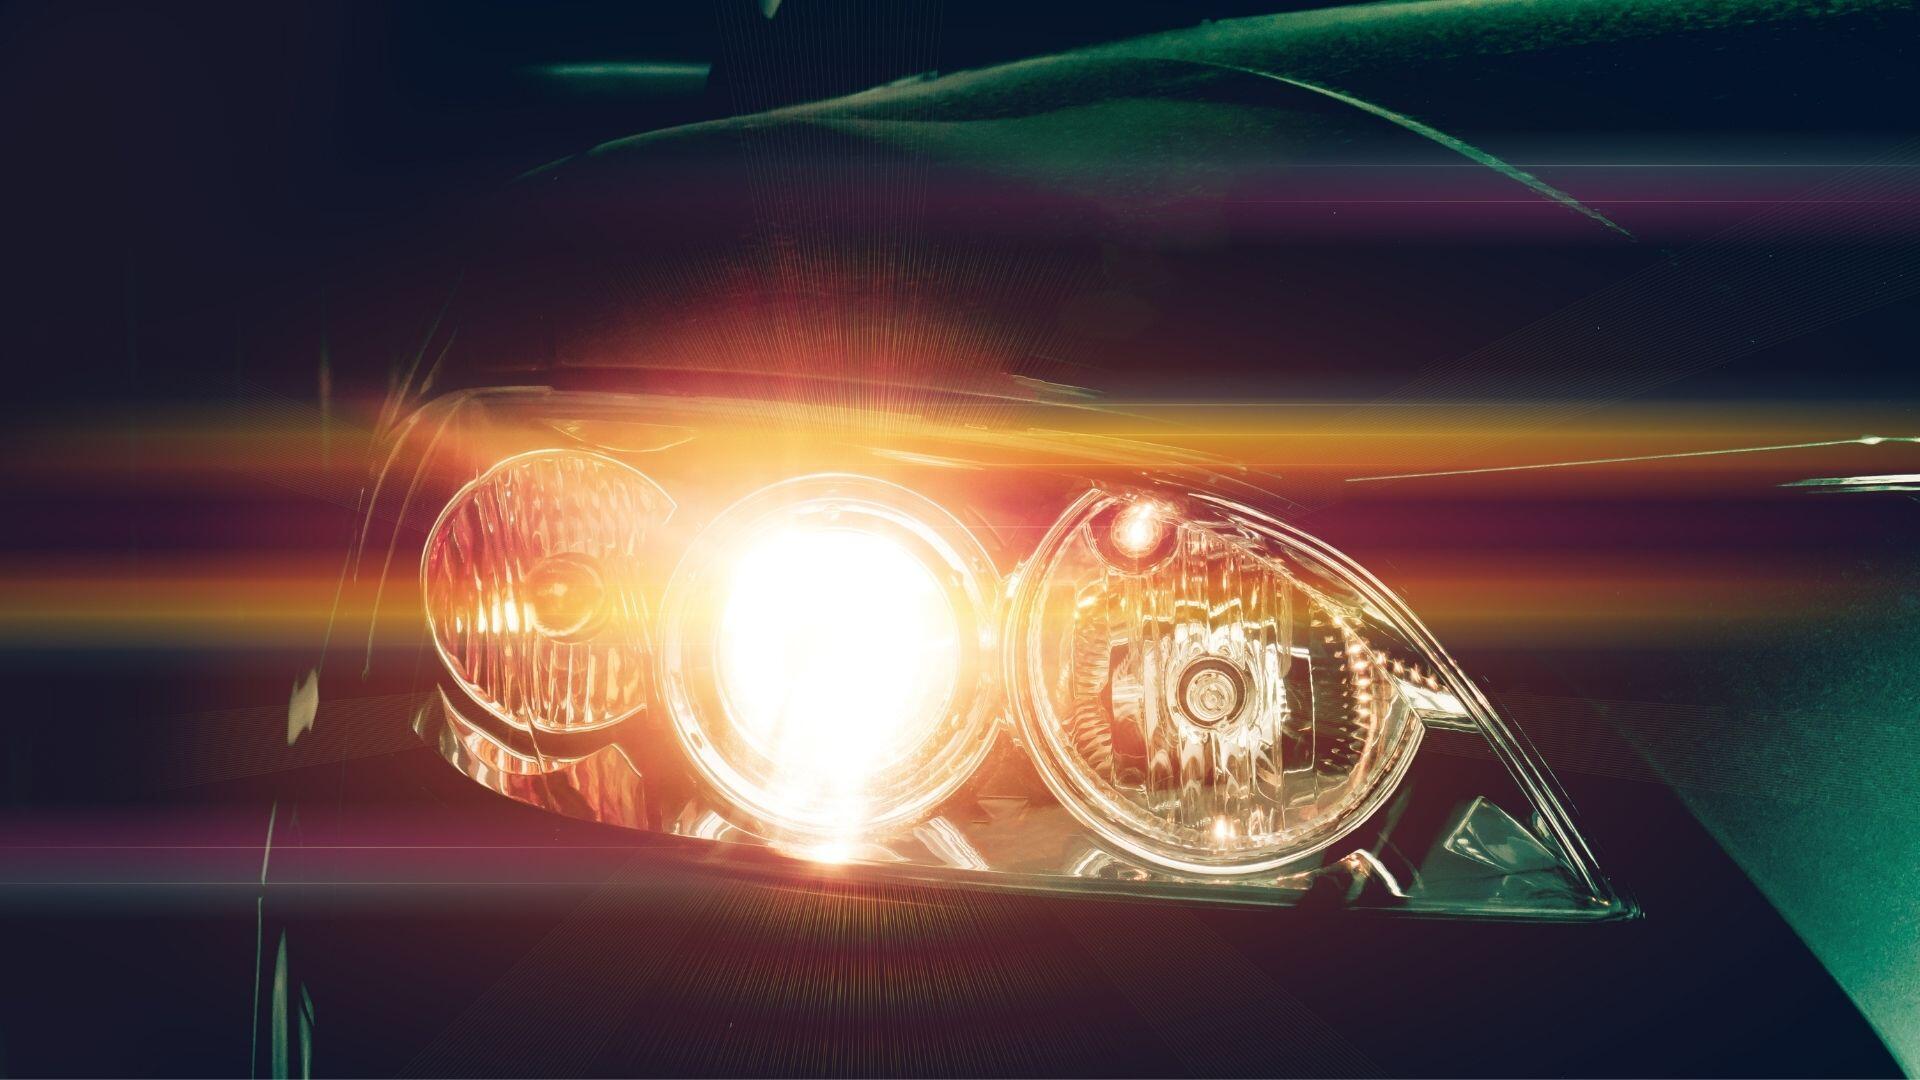 What You Should Know About Aftermarket Headlights Before Buying